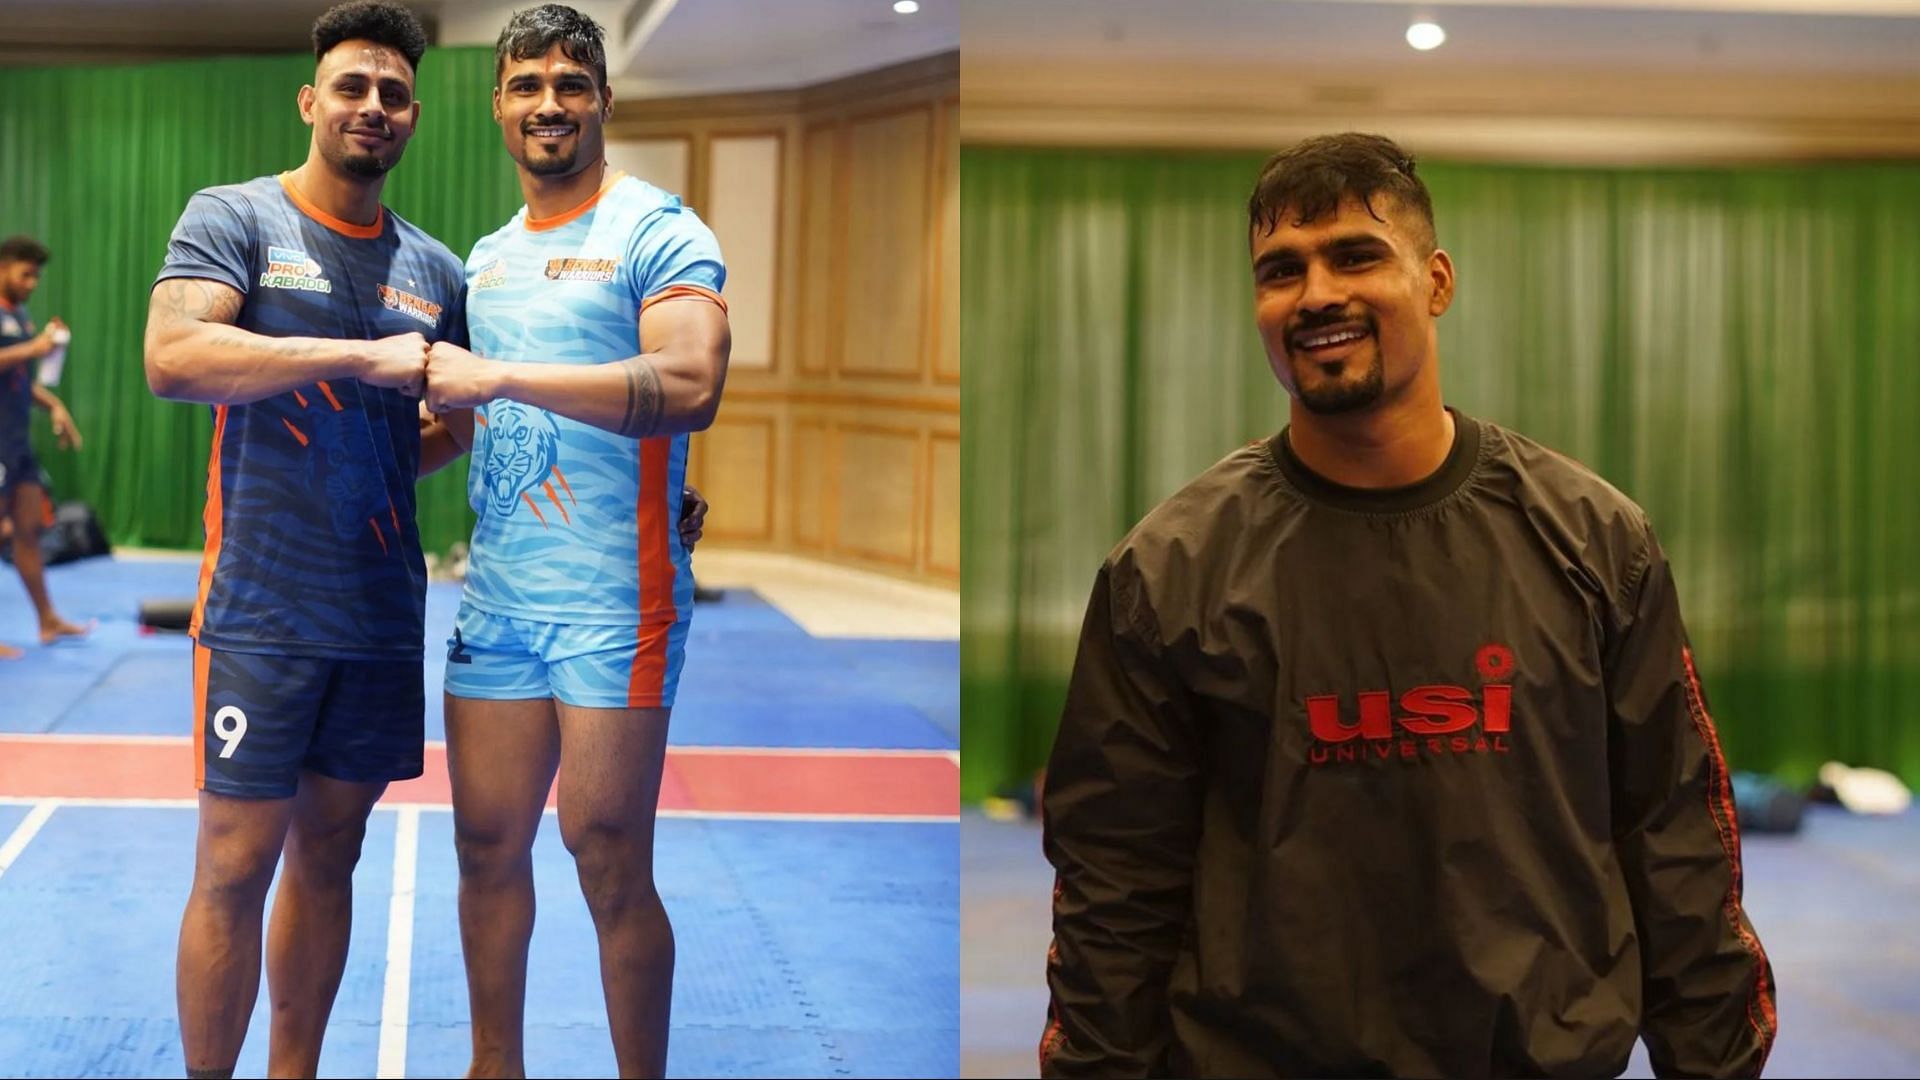 Shrikant Jadhav and Maninder Singh will play together in PKL 2022 (Image: Instagram)